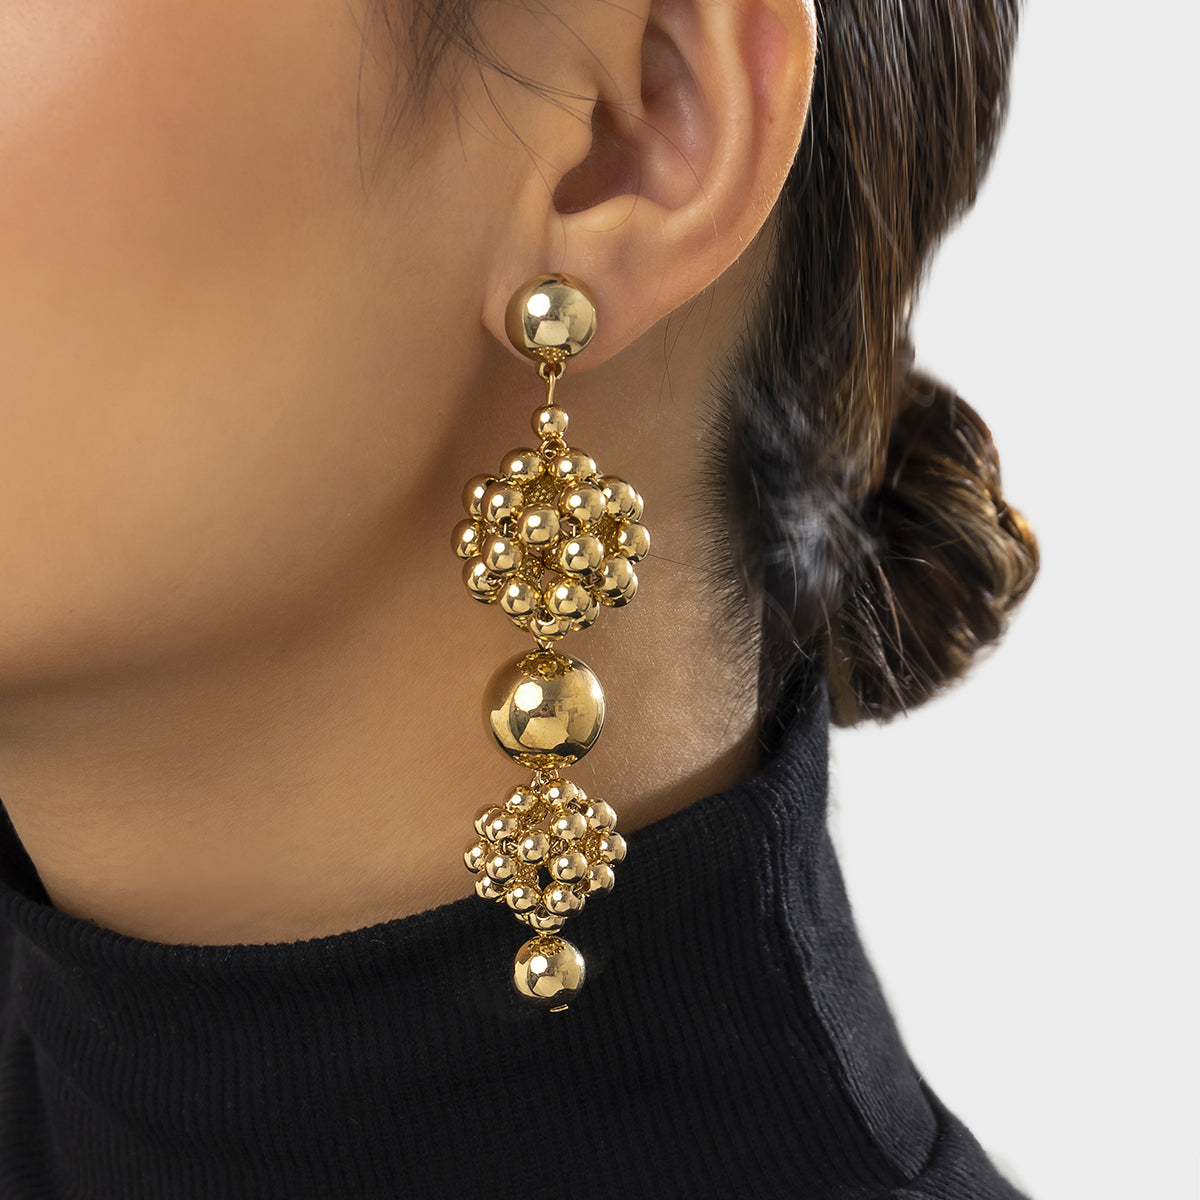 18K Gold-Plated Bead Cluster Drop Earrings